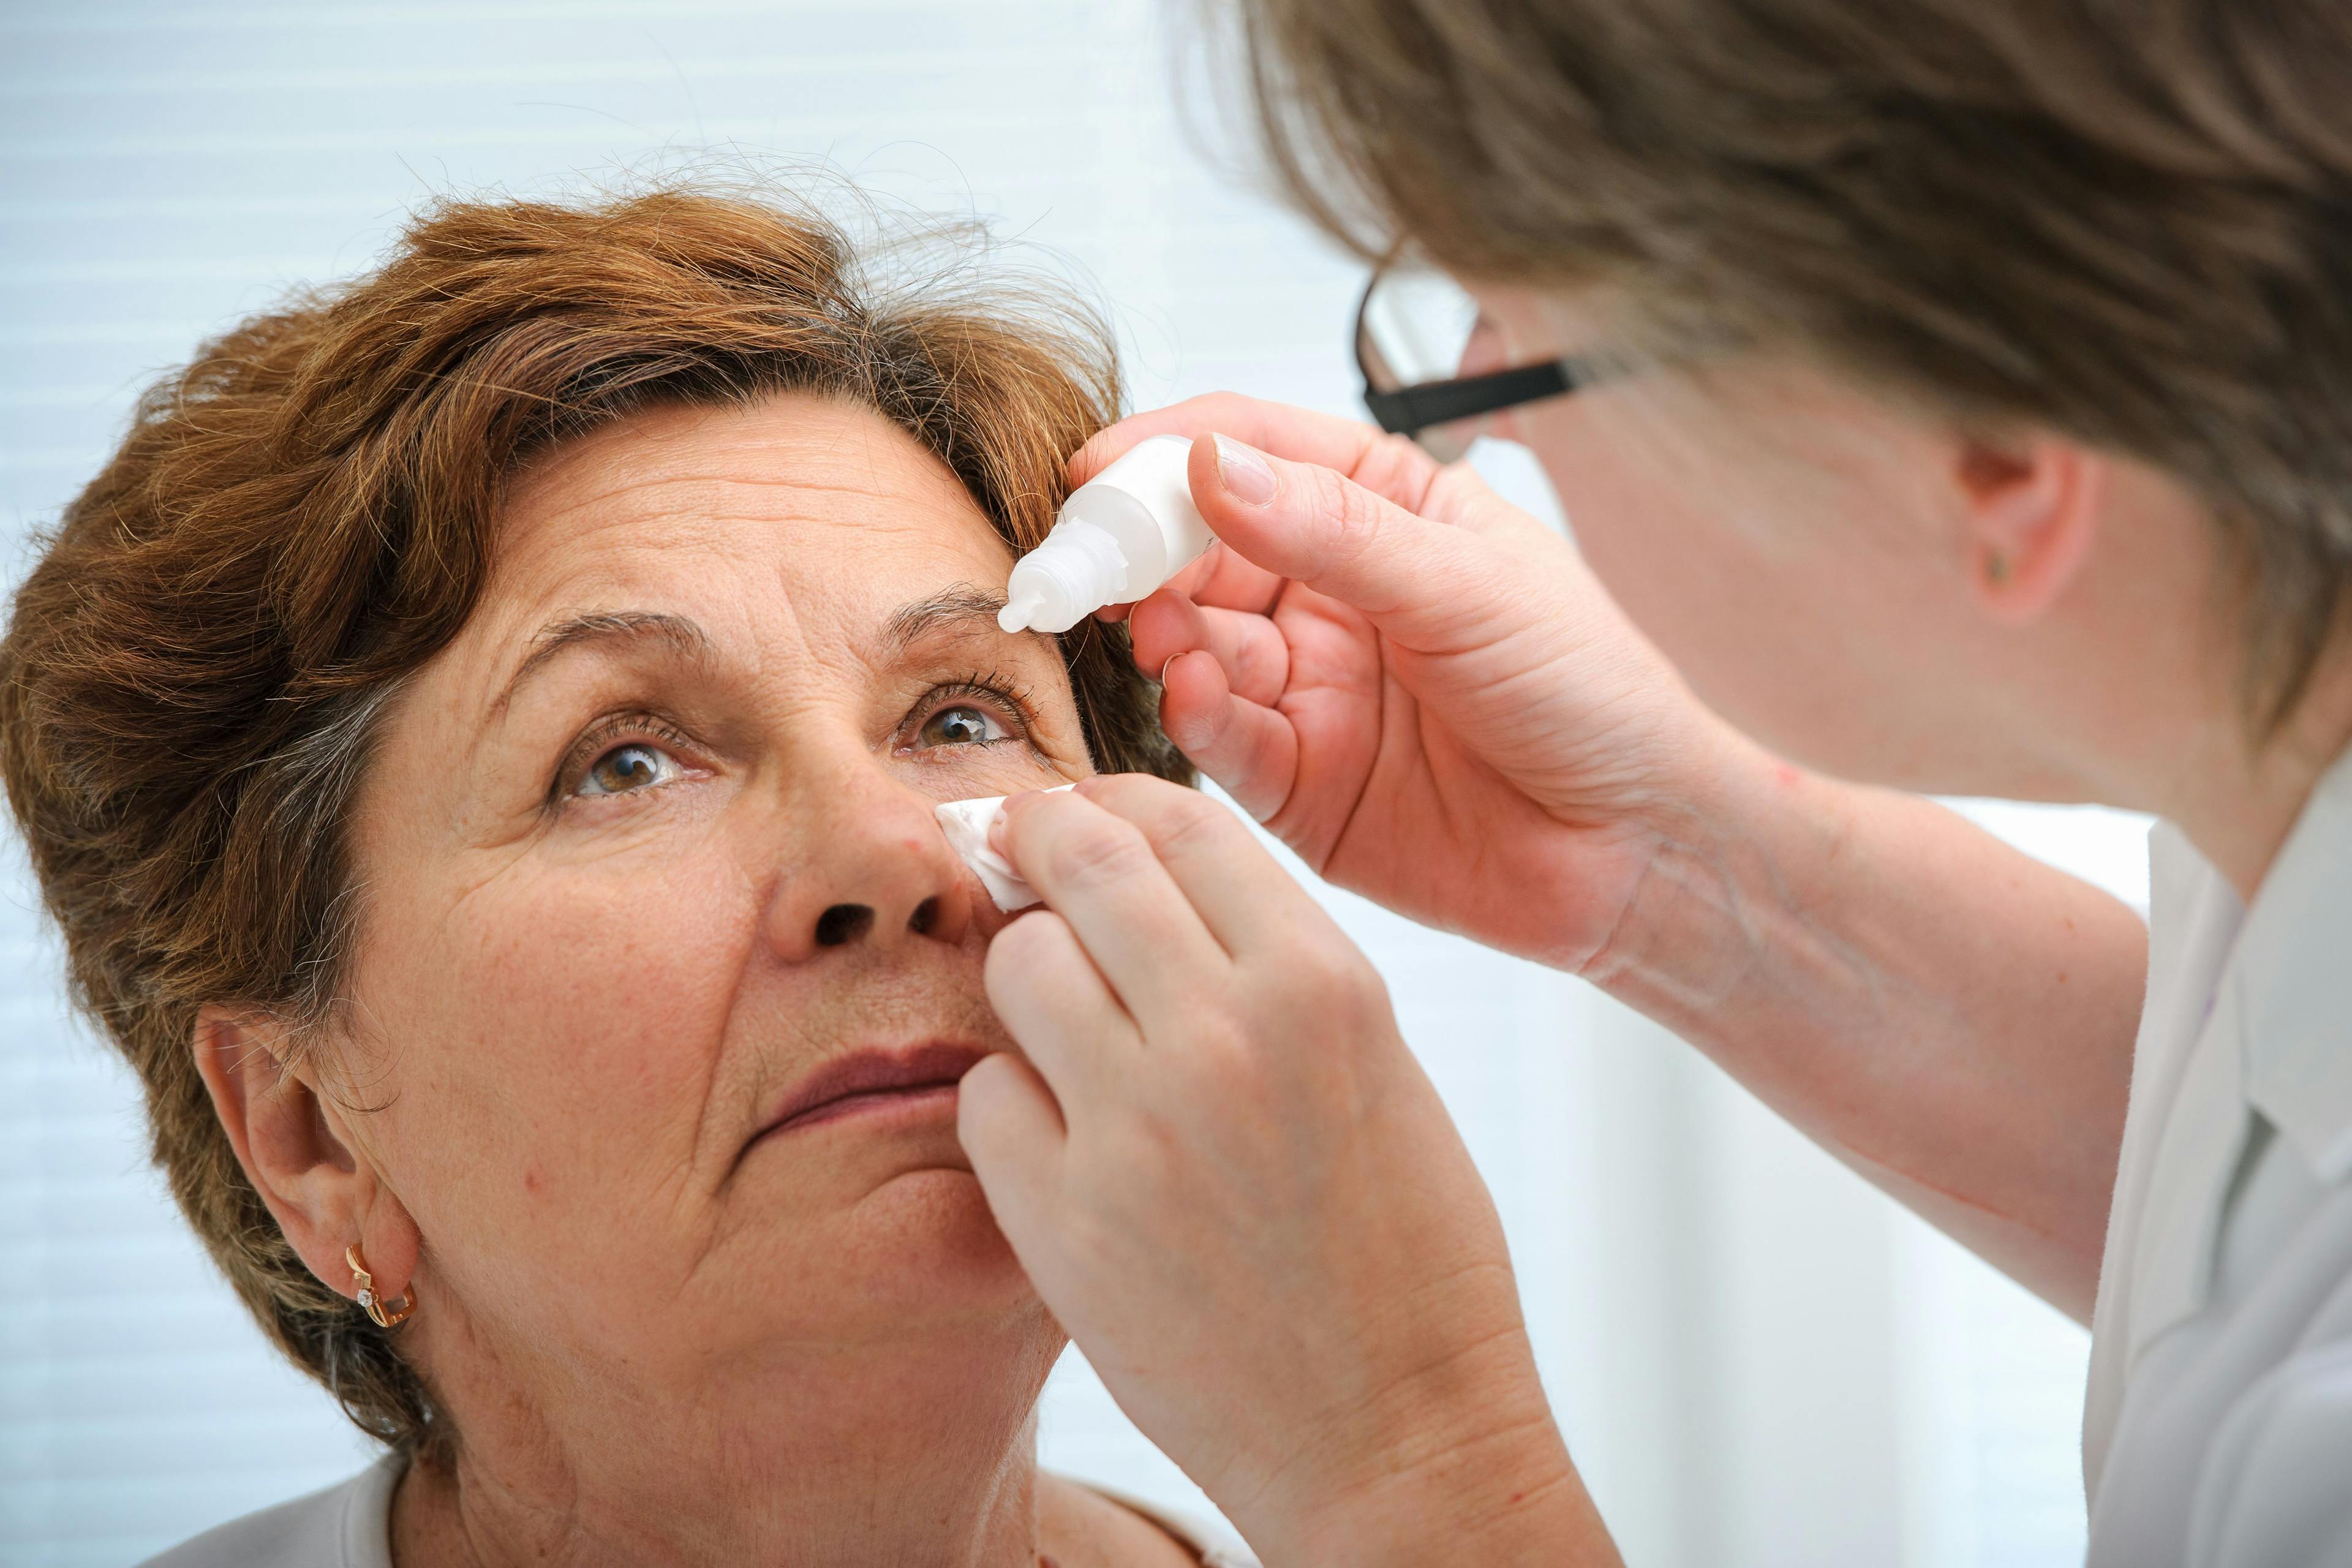 Eye care professional administering eye drops to woman